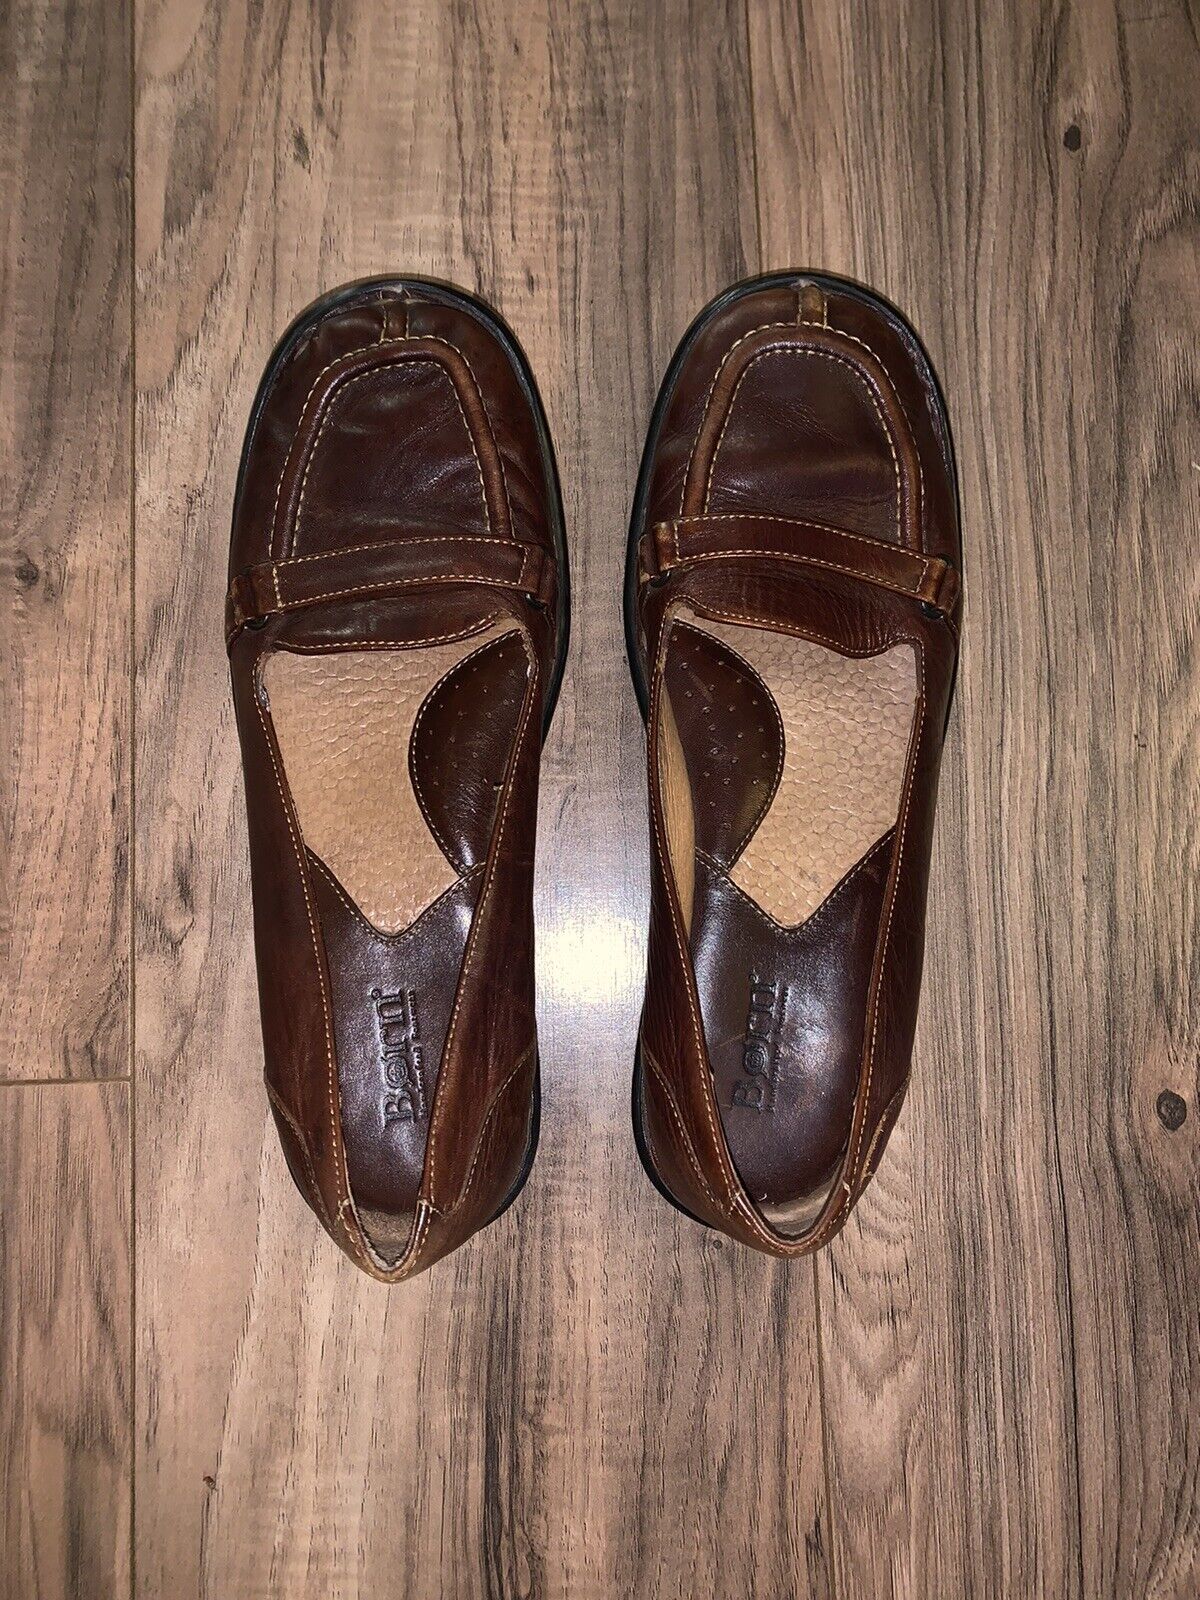 Born Leather Moc Toe Loafers Size 8 Flats Brown G… - image 4